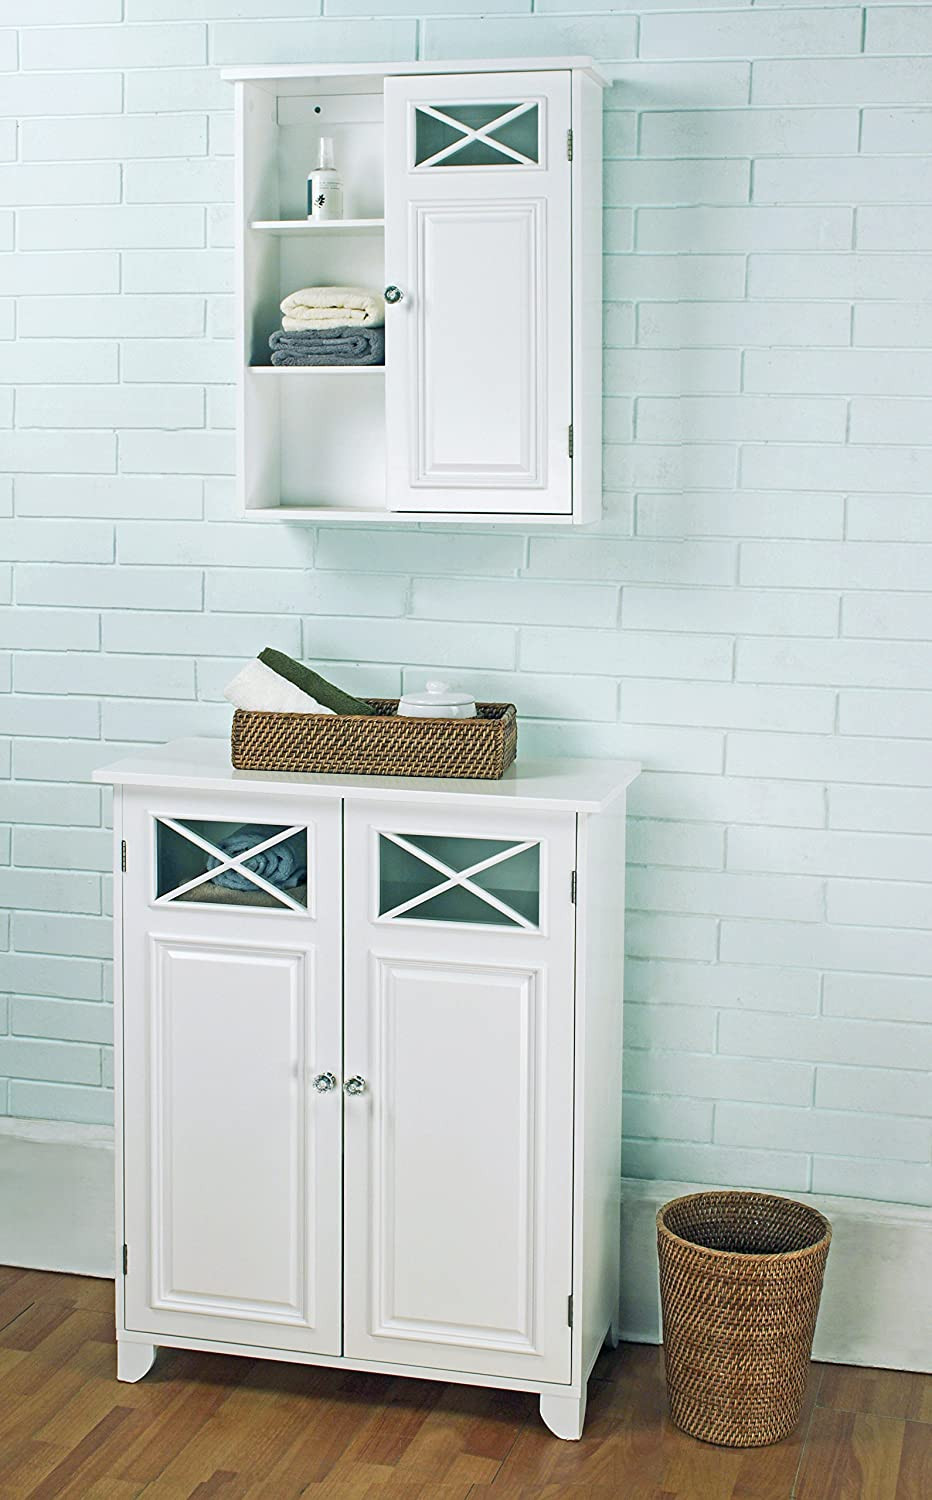 Bathroom Furniture Storage
 8 Best Bathroom Storage Cabinets For Small Spaces in 2019